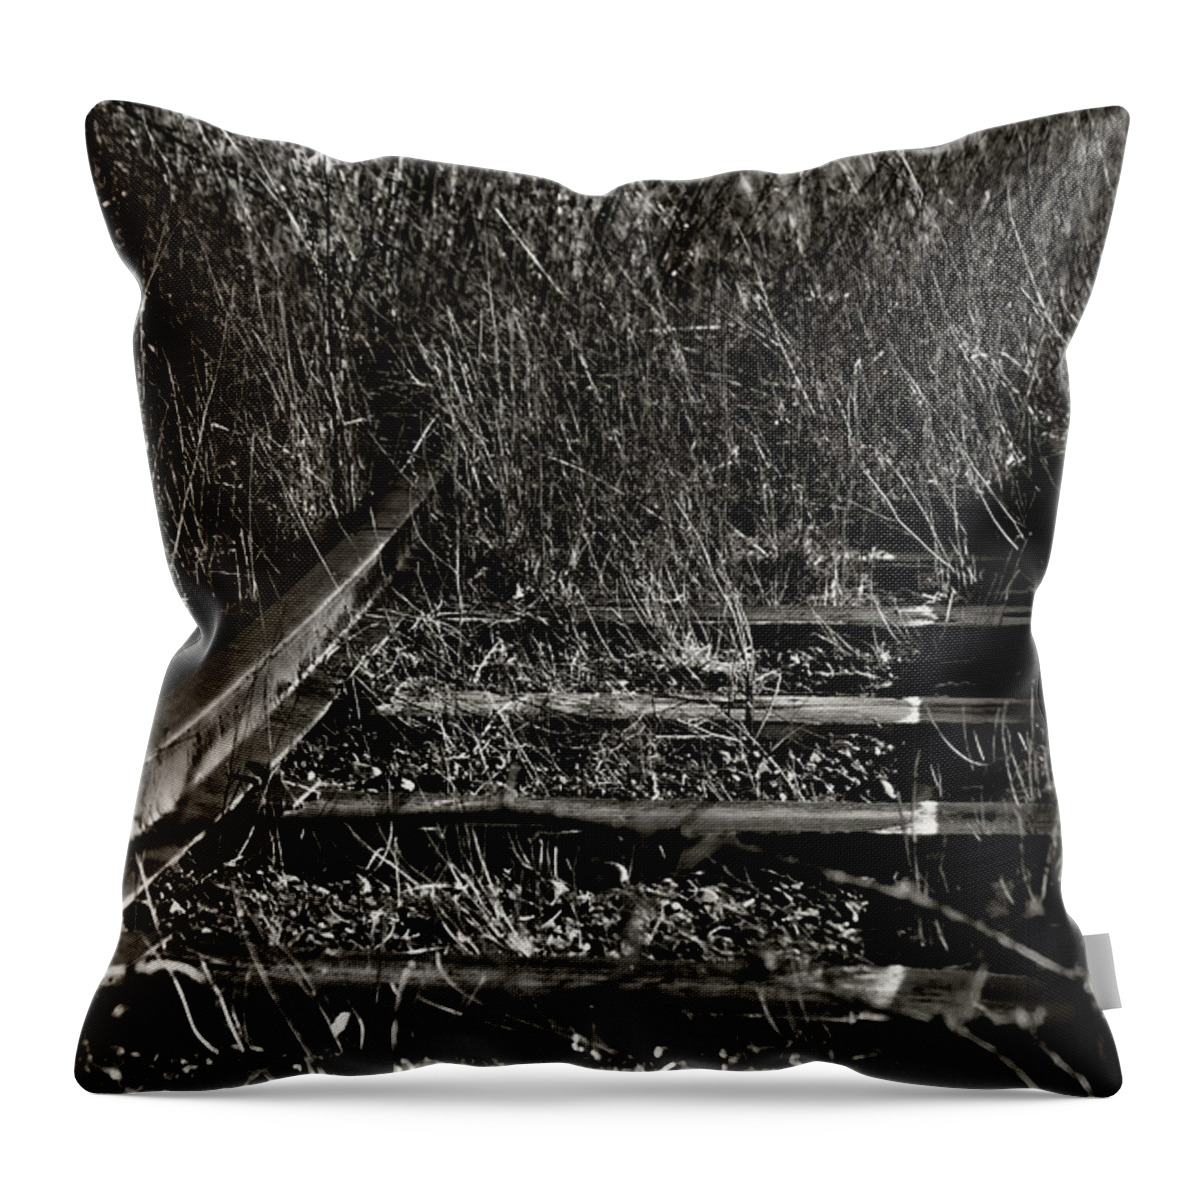 Rail Throw Pillow featuring the photograph Old Rails by Ron Roberts